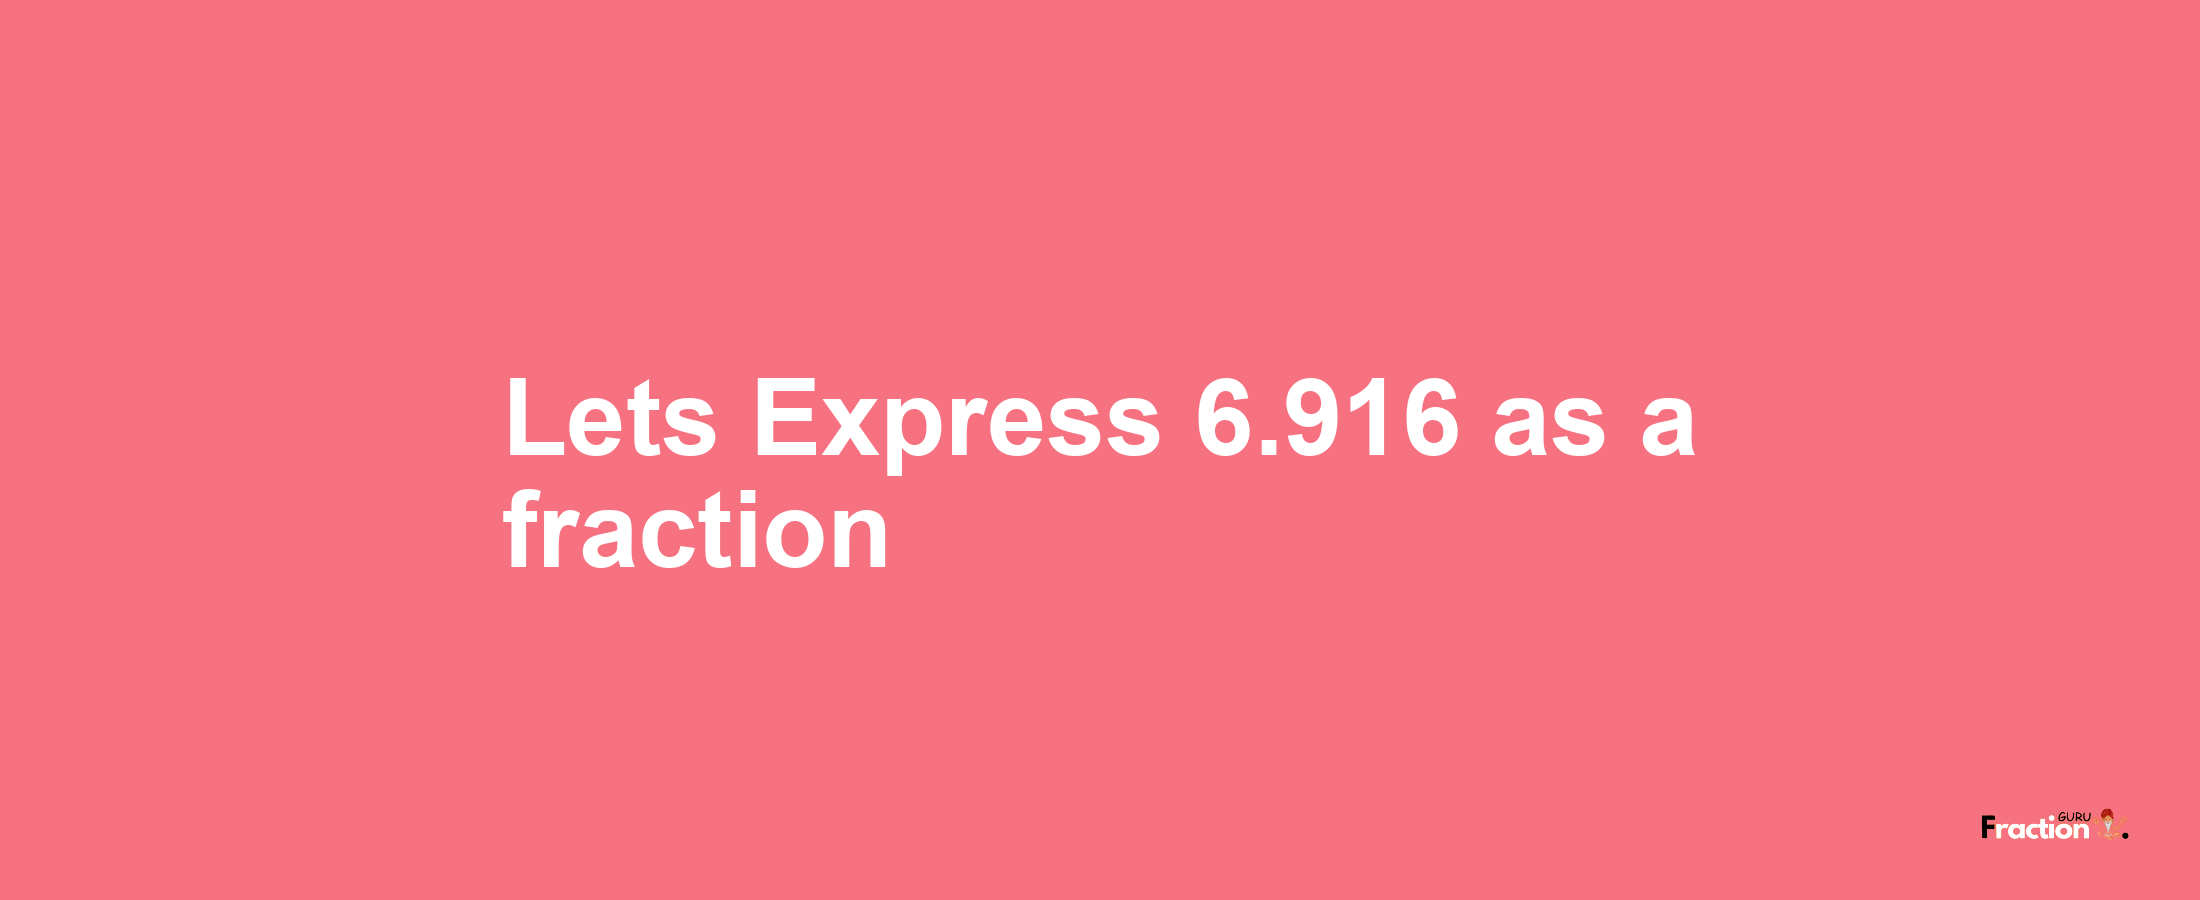 Lets Express 6.916 as afraction